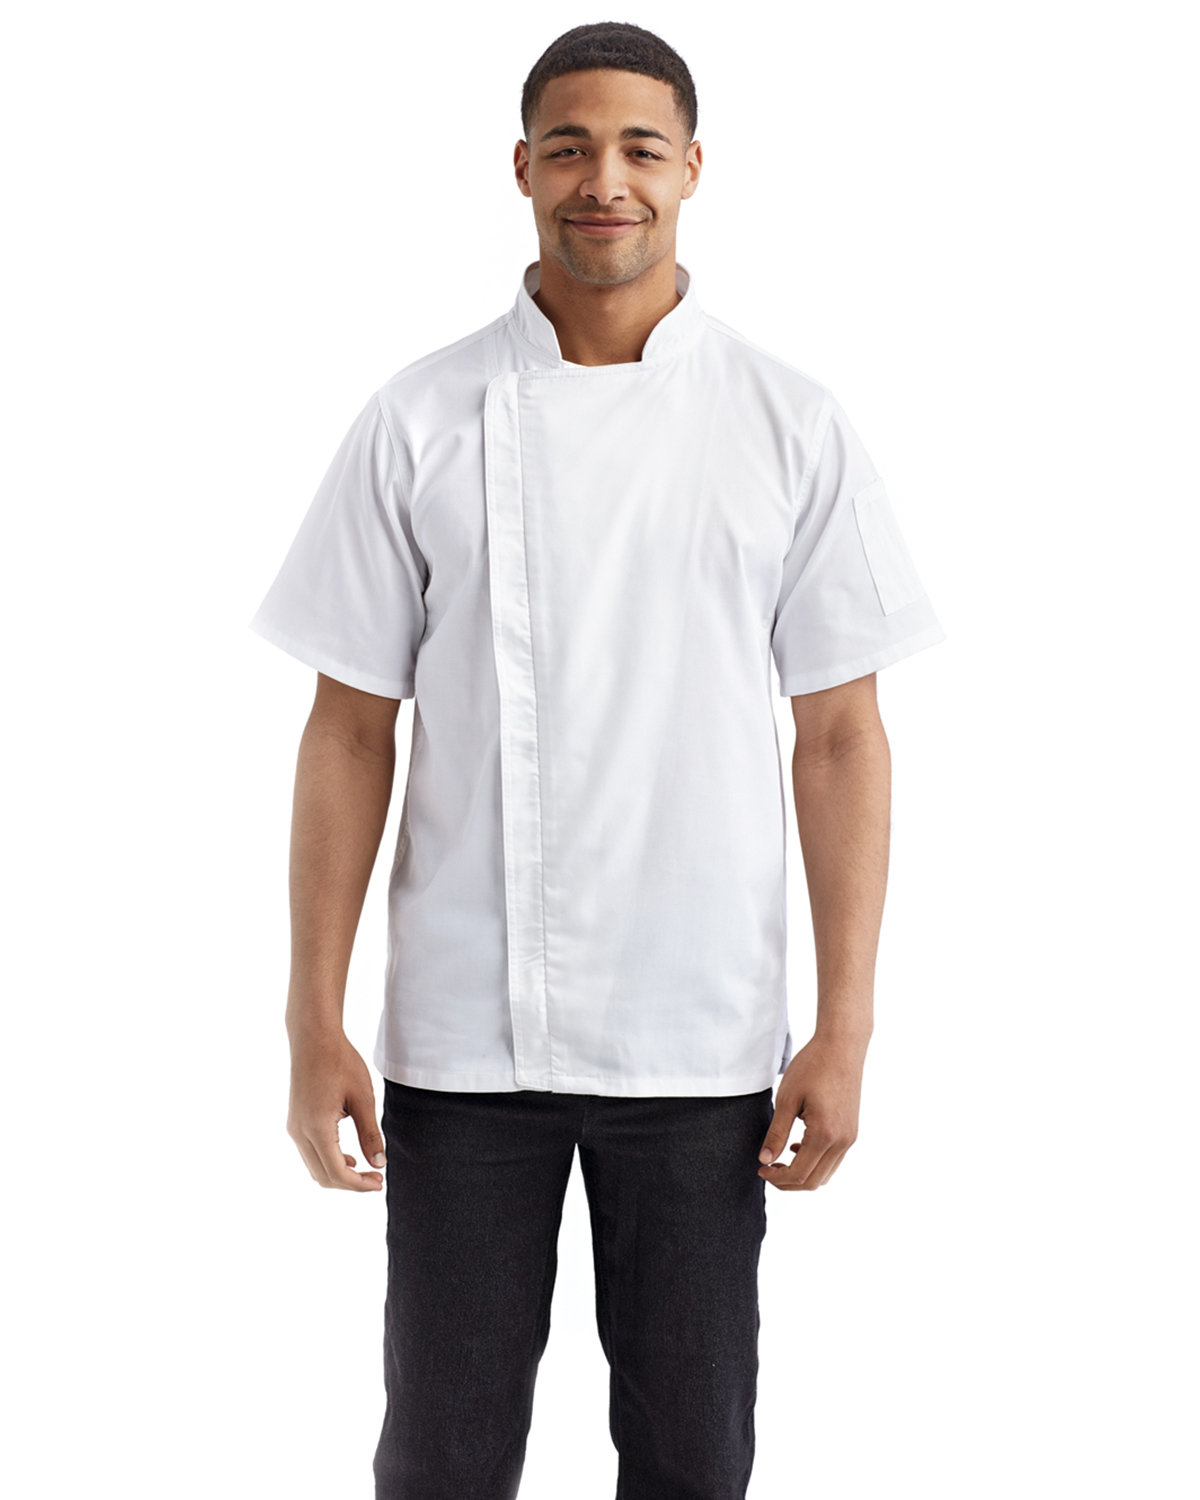 Artisan Collection by Reprime Unisex Zip-Close Short Sleeve Chef's Coat WHITE 